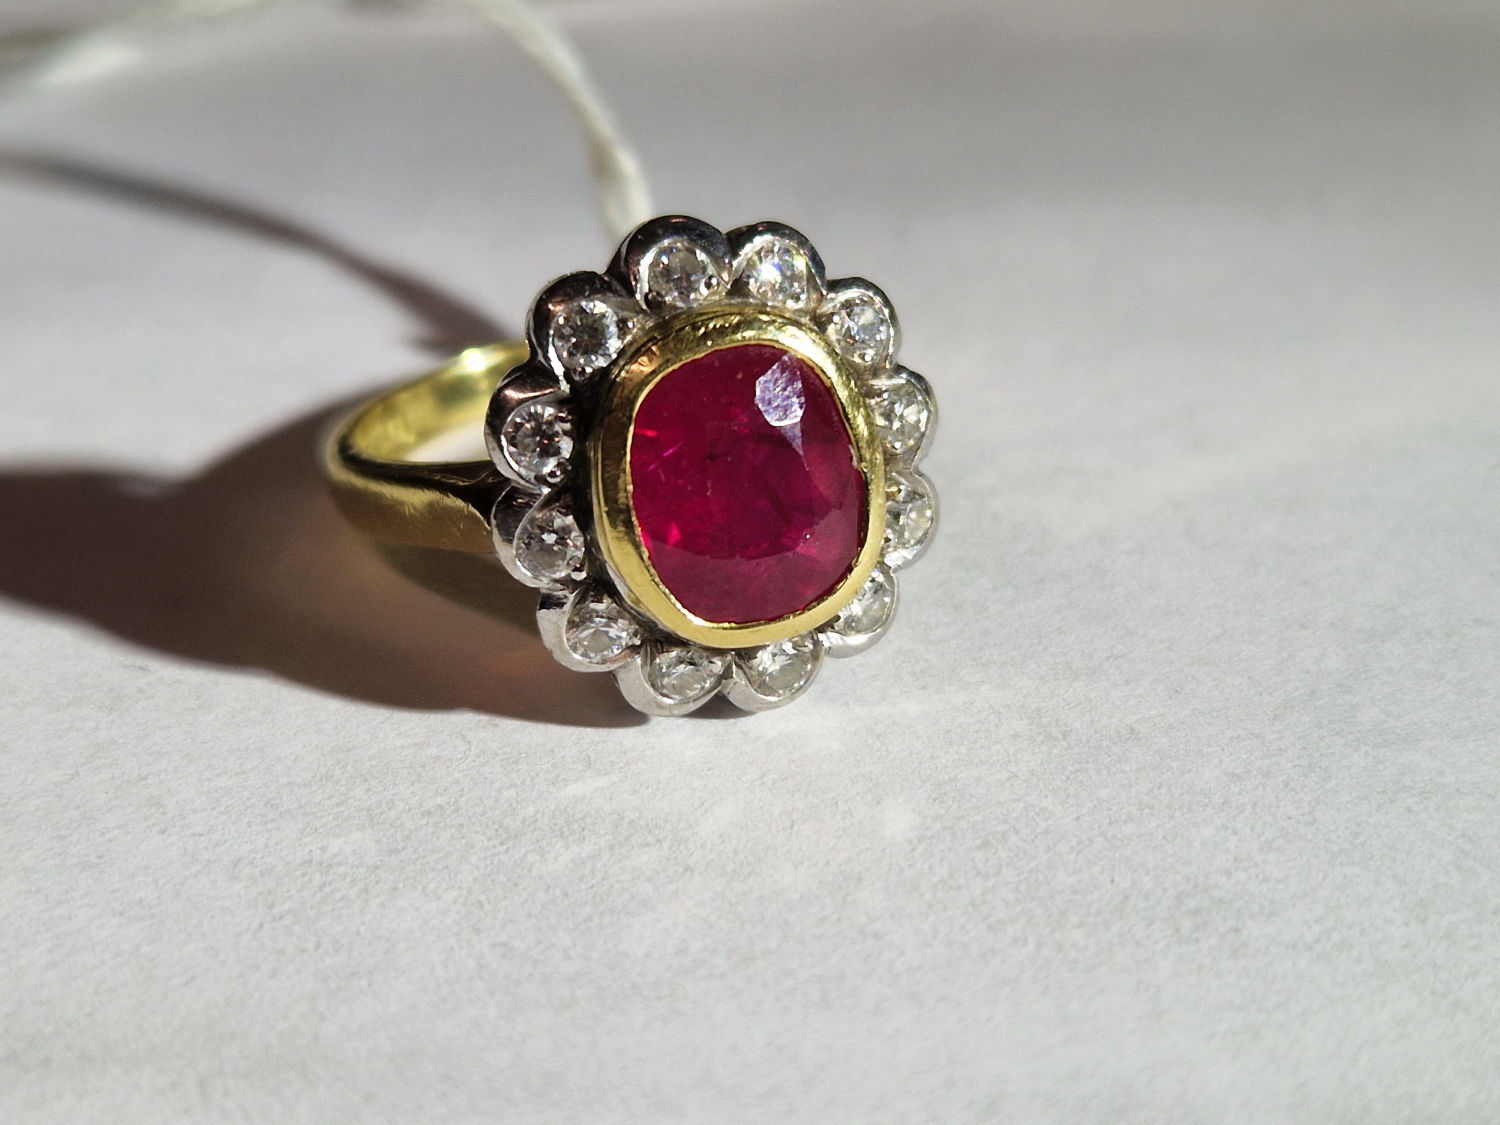 AN 18ct HALLMARKED GOLD RUBY AND DIAMOND OVAL SHAPED CLUSTER RING. THE SINGLE MEDIUM TO DARK - Image 14 of 20